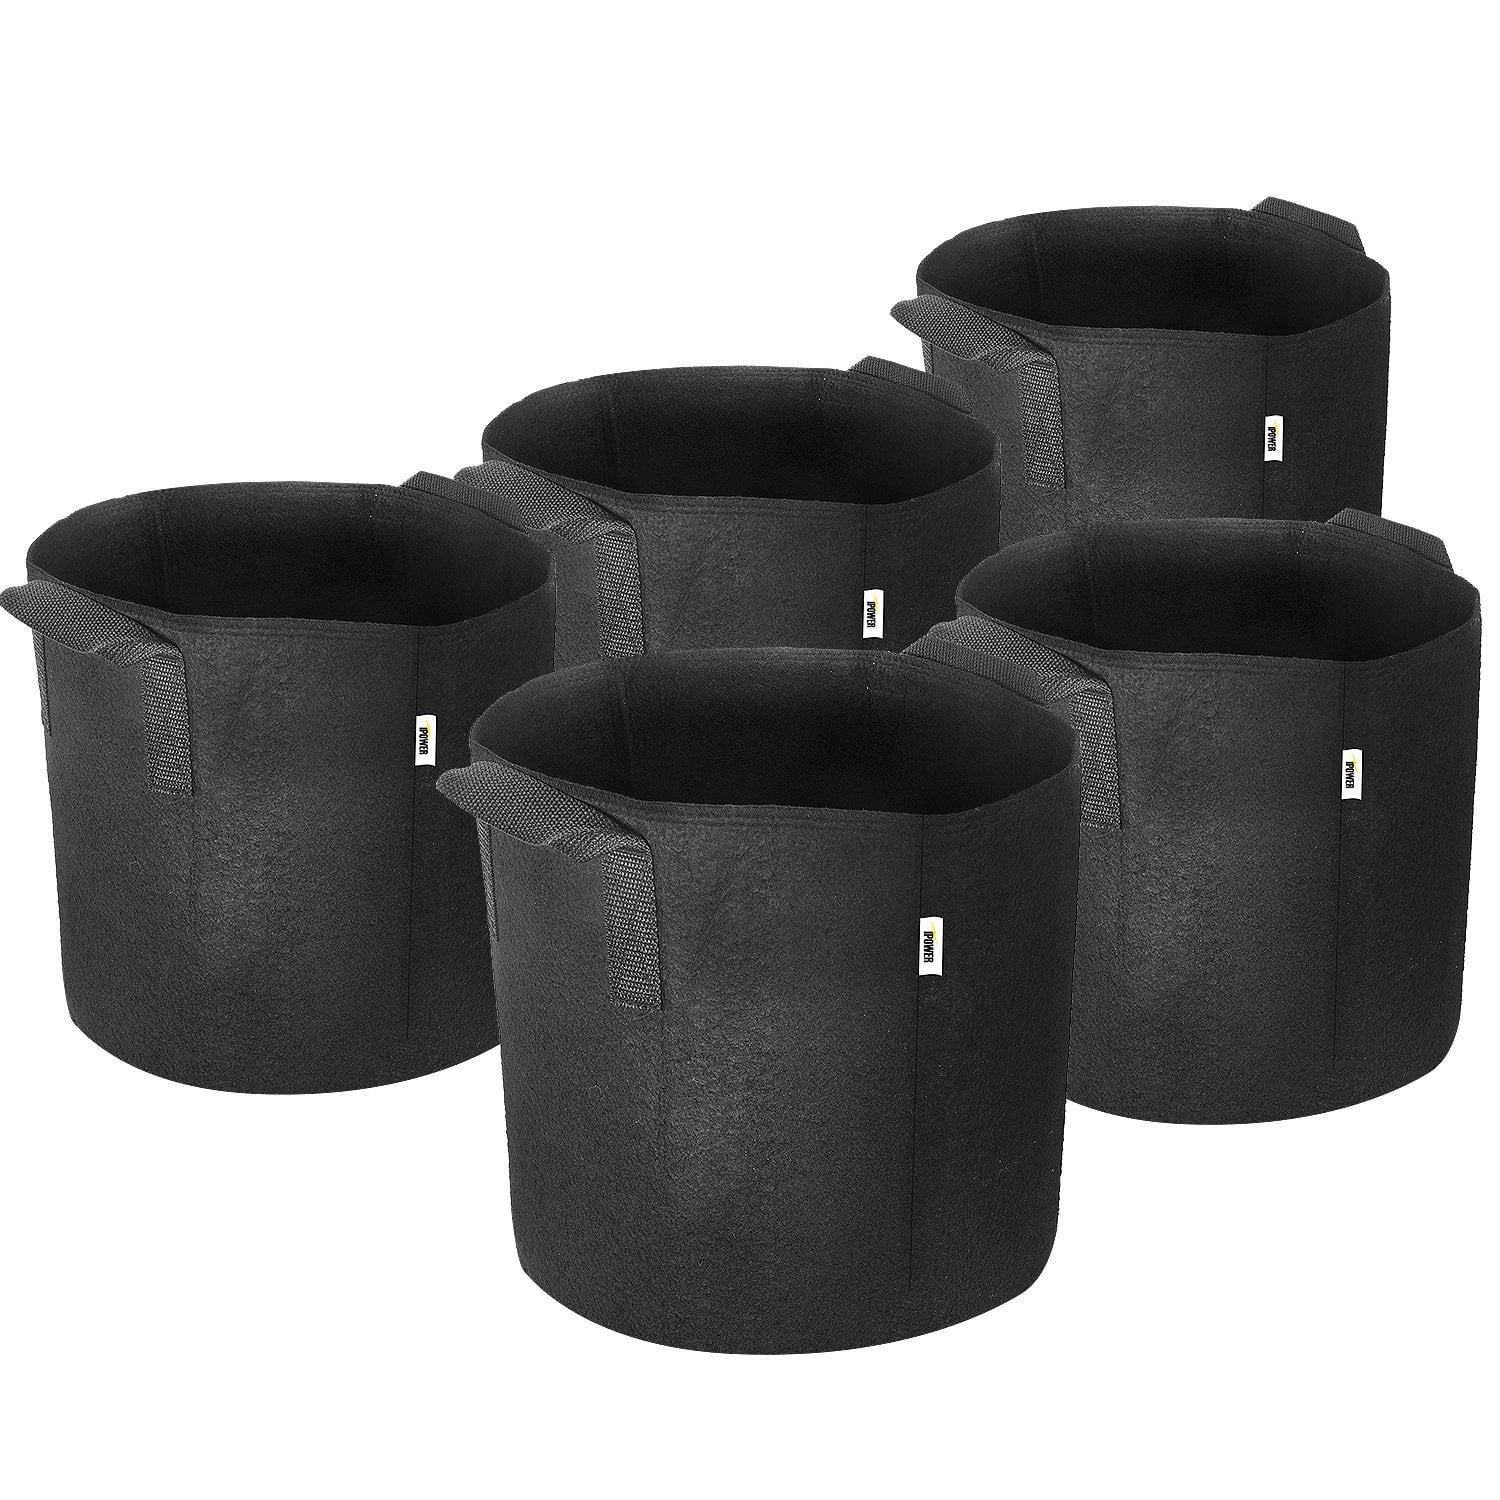 New 3-5-7 Gallon Black/Gray Fabric Pots Grow Bags /w Handles Planting Container 